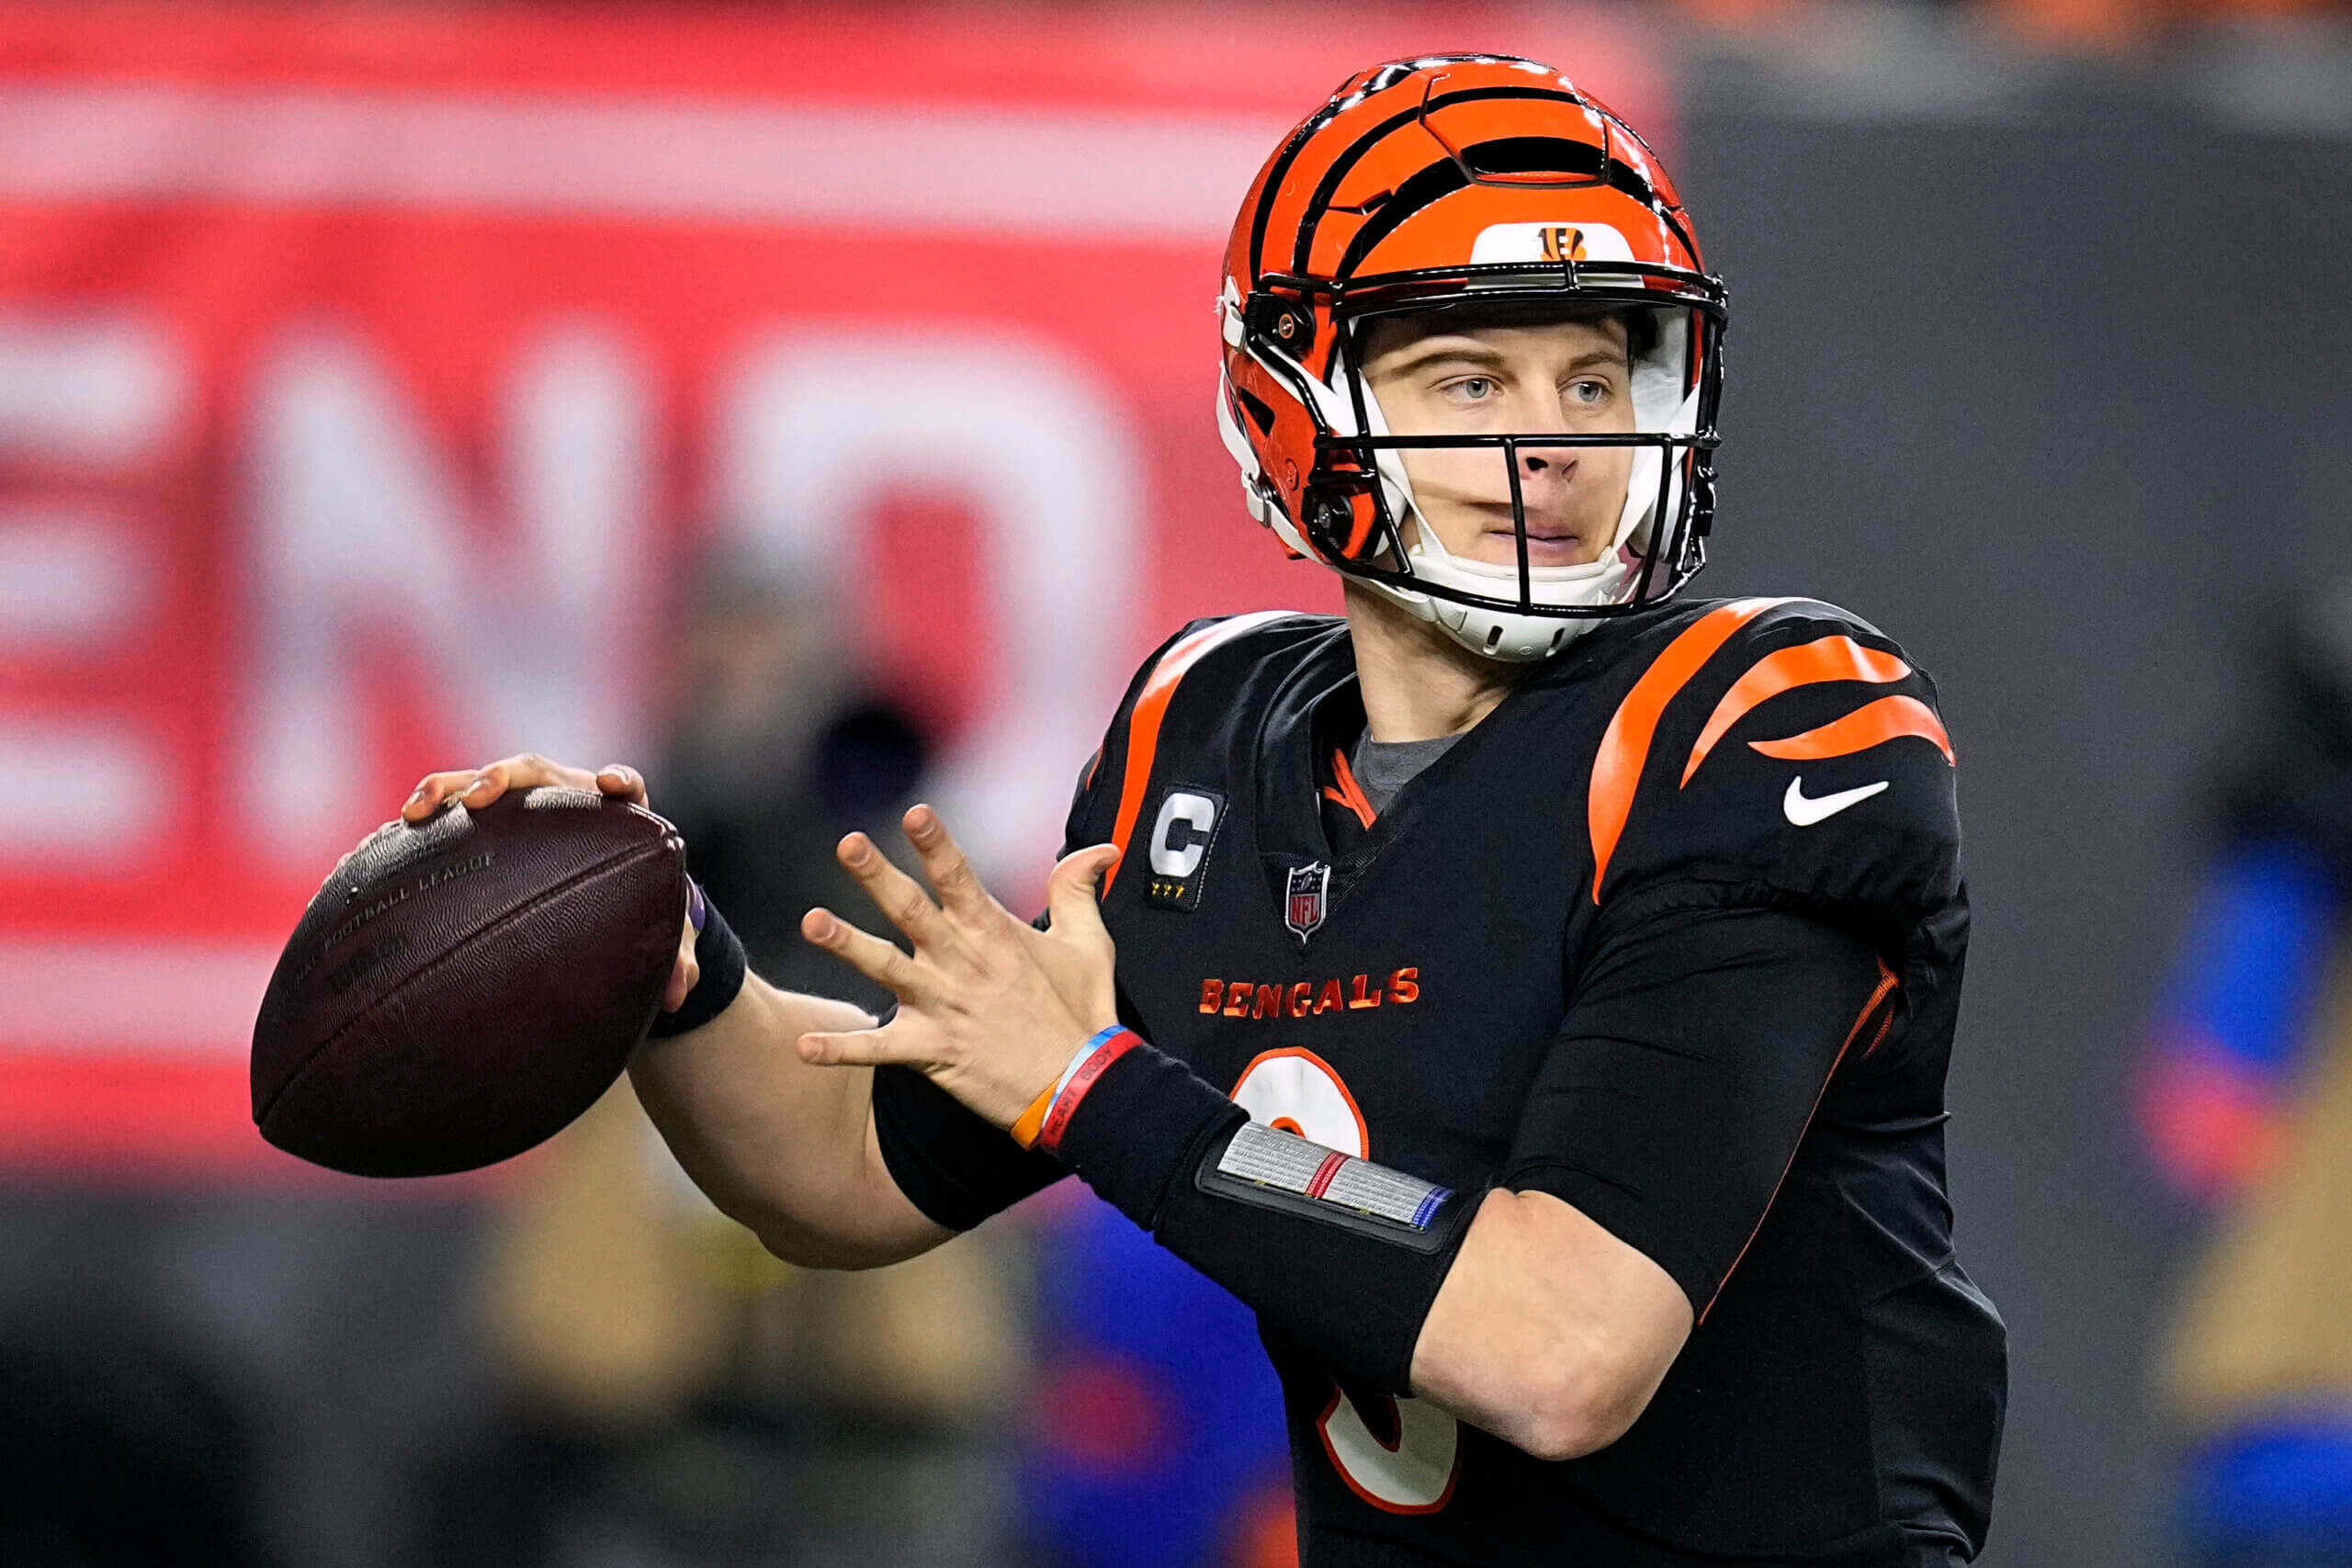 NFL Live In-Game Betting Tips & Strategy: Browns vs. Bengals – Week 1